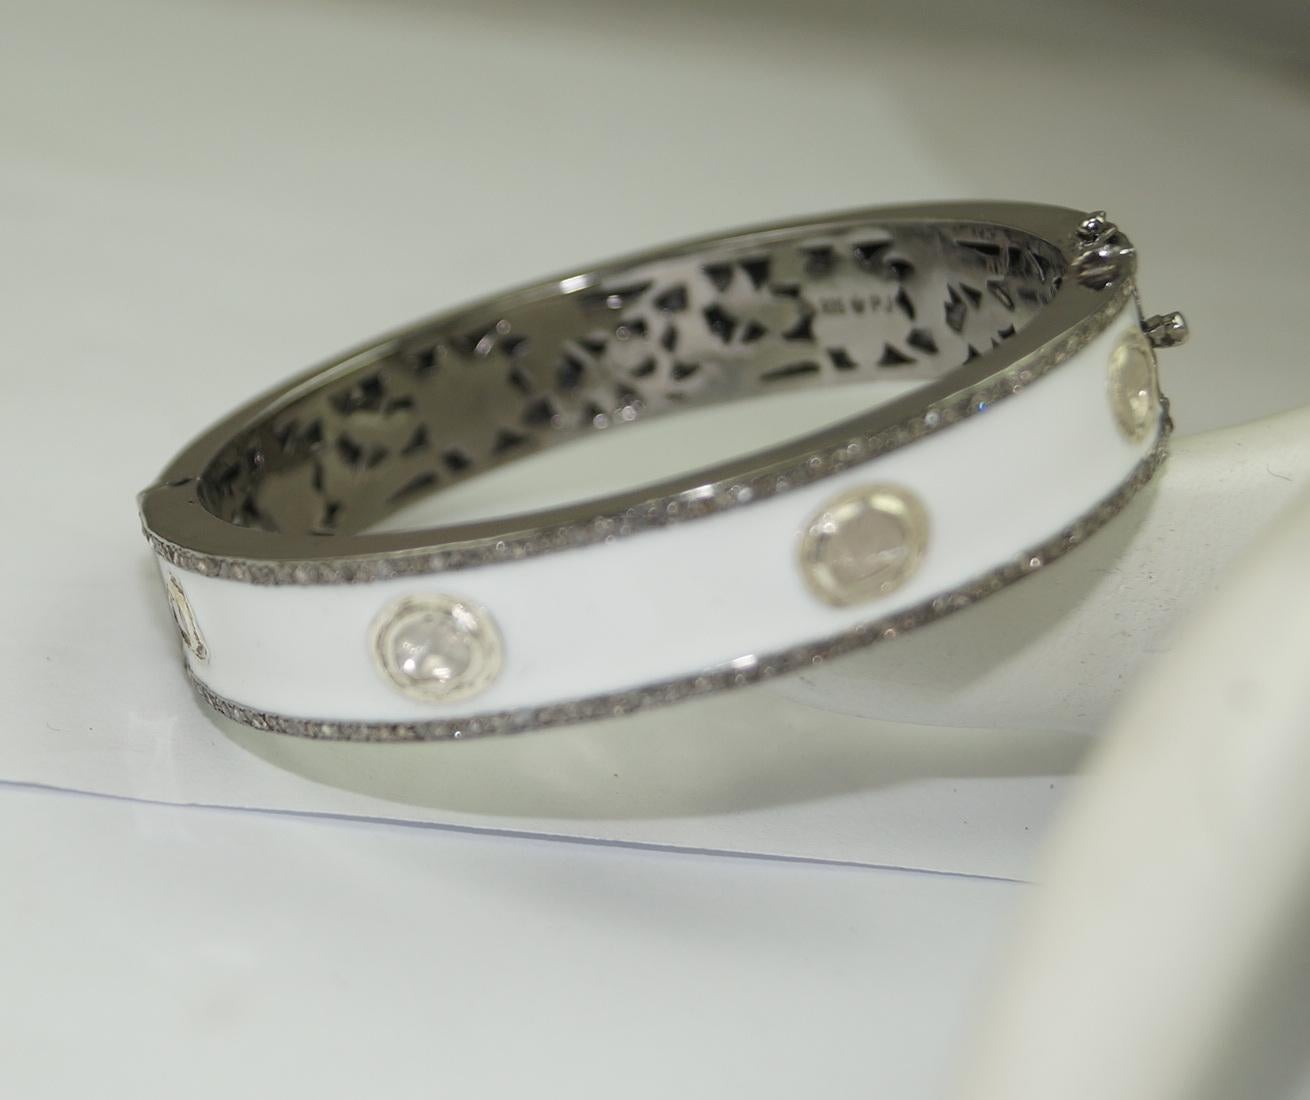 This elegant, hinged bangle consists of:

Diamond- 4.10cts
Diamond type: Uncut and rose cut diamonds
Diamond color: White 
Diamond Certificate- Certified Natural
Metal: Silver
Metal Purity: Sterling Silver or 92.5% Pure
Color of silver- Oxidized